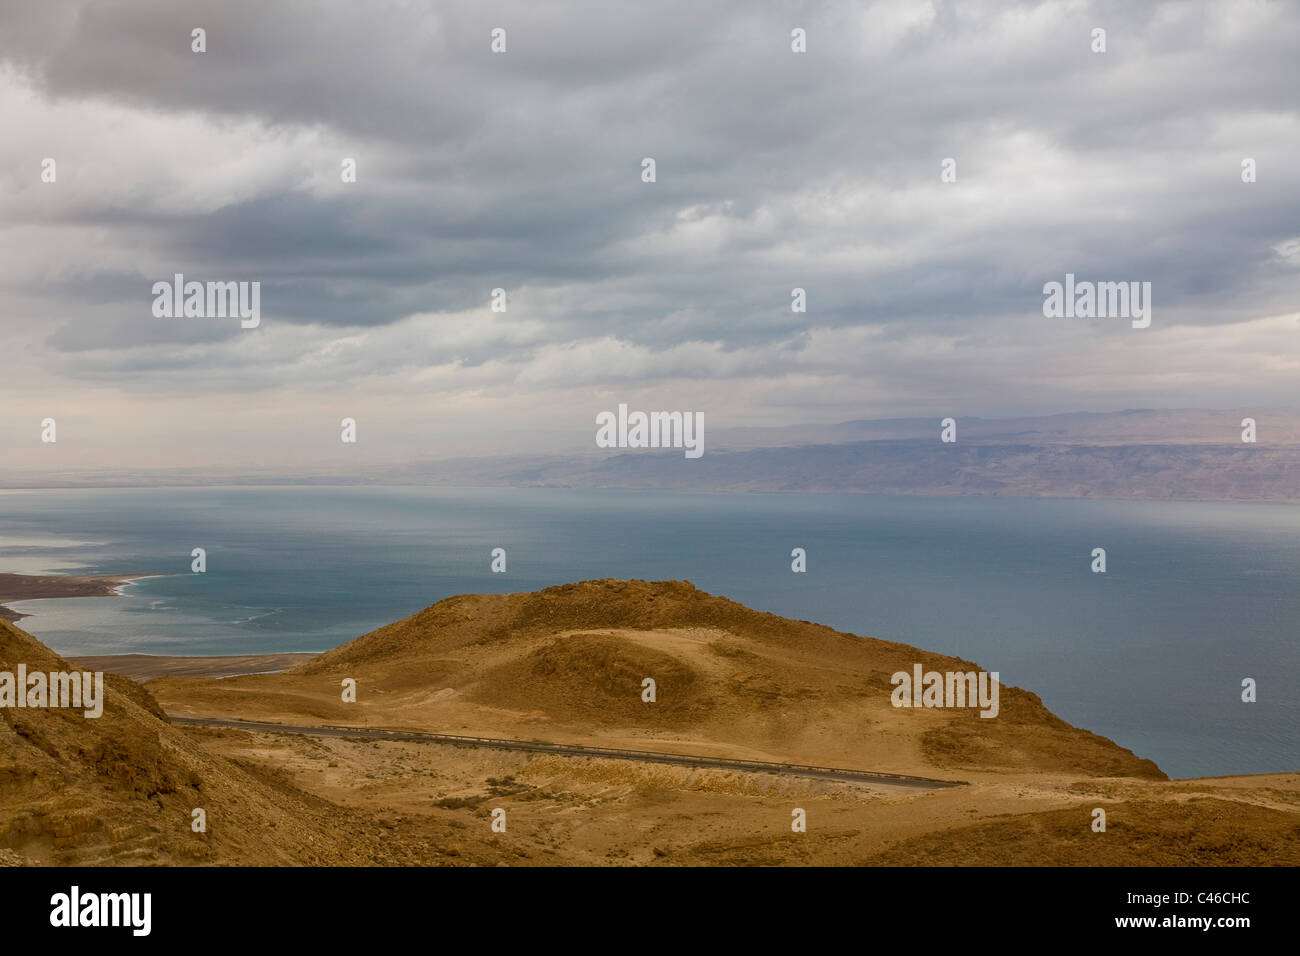 Photograph of the Dead sea in the winter Stock Photo